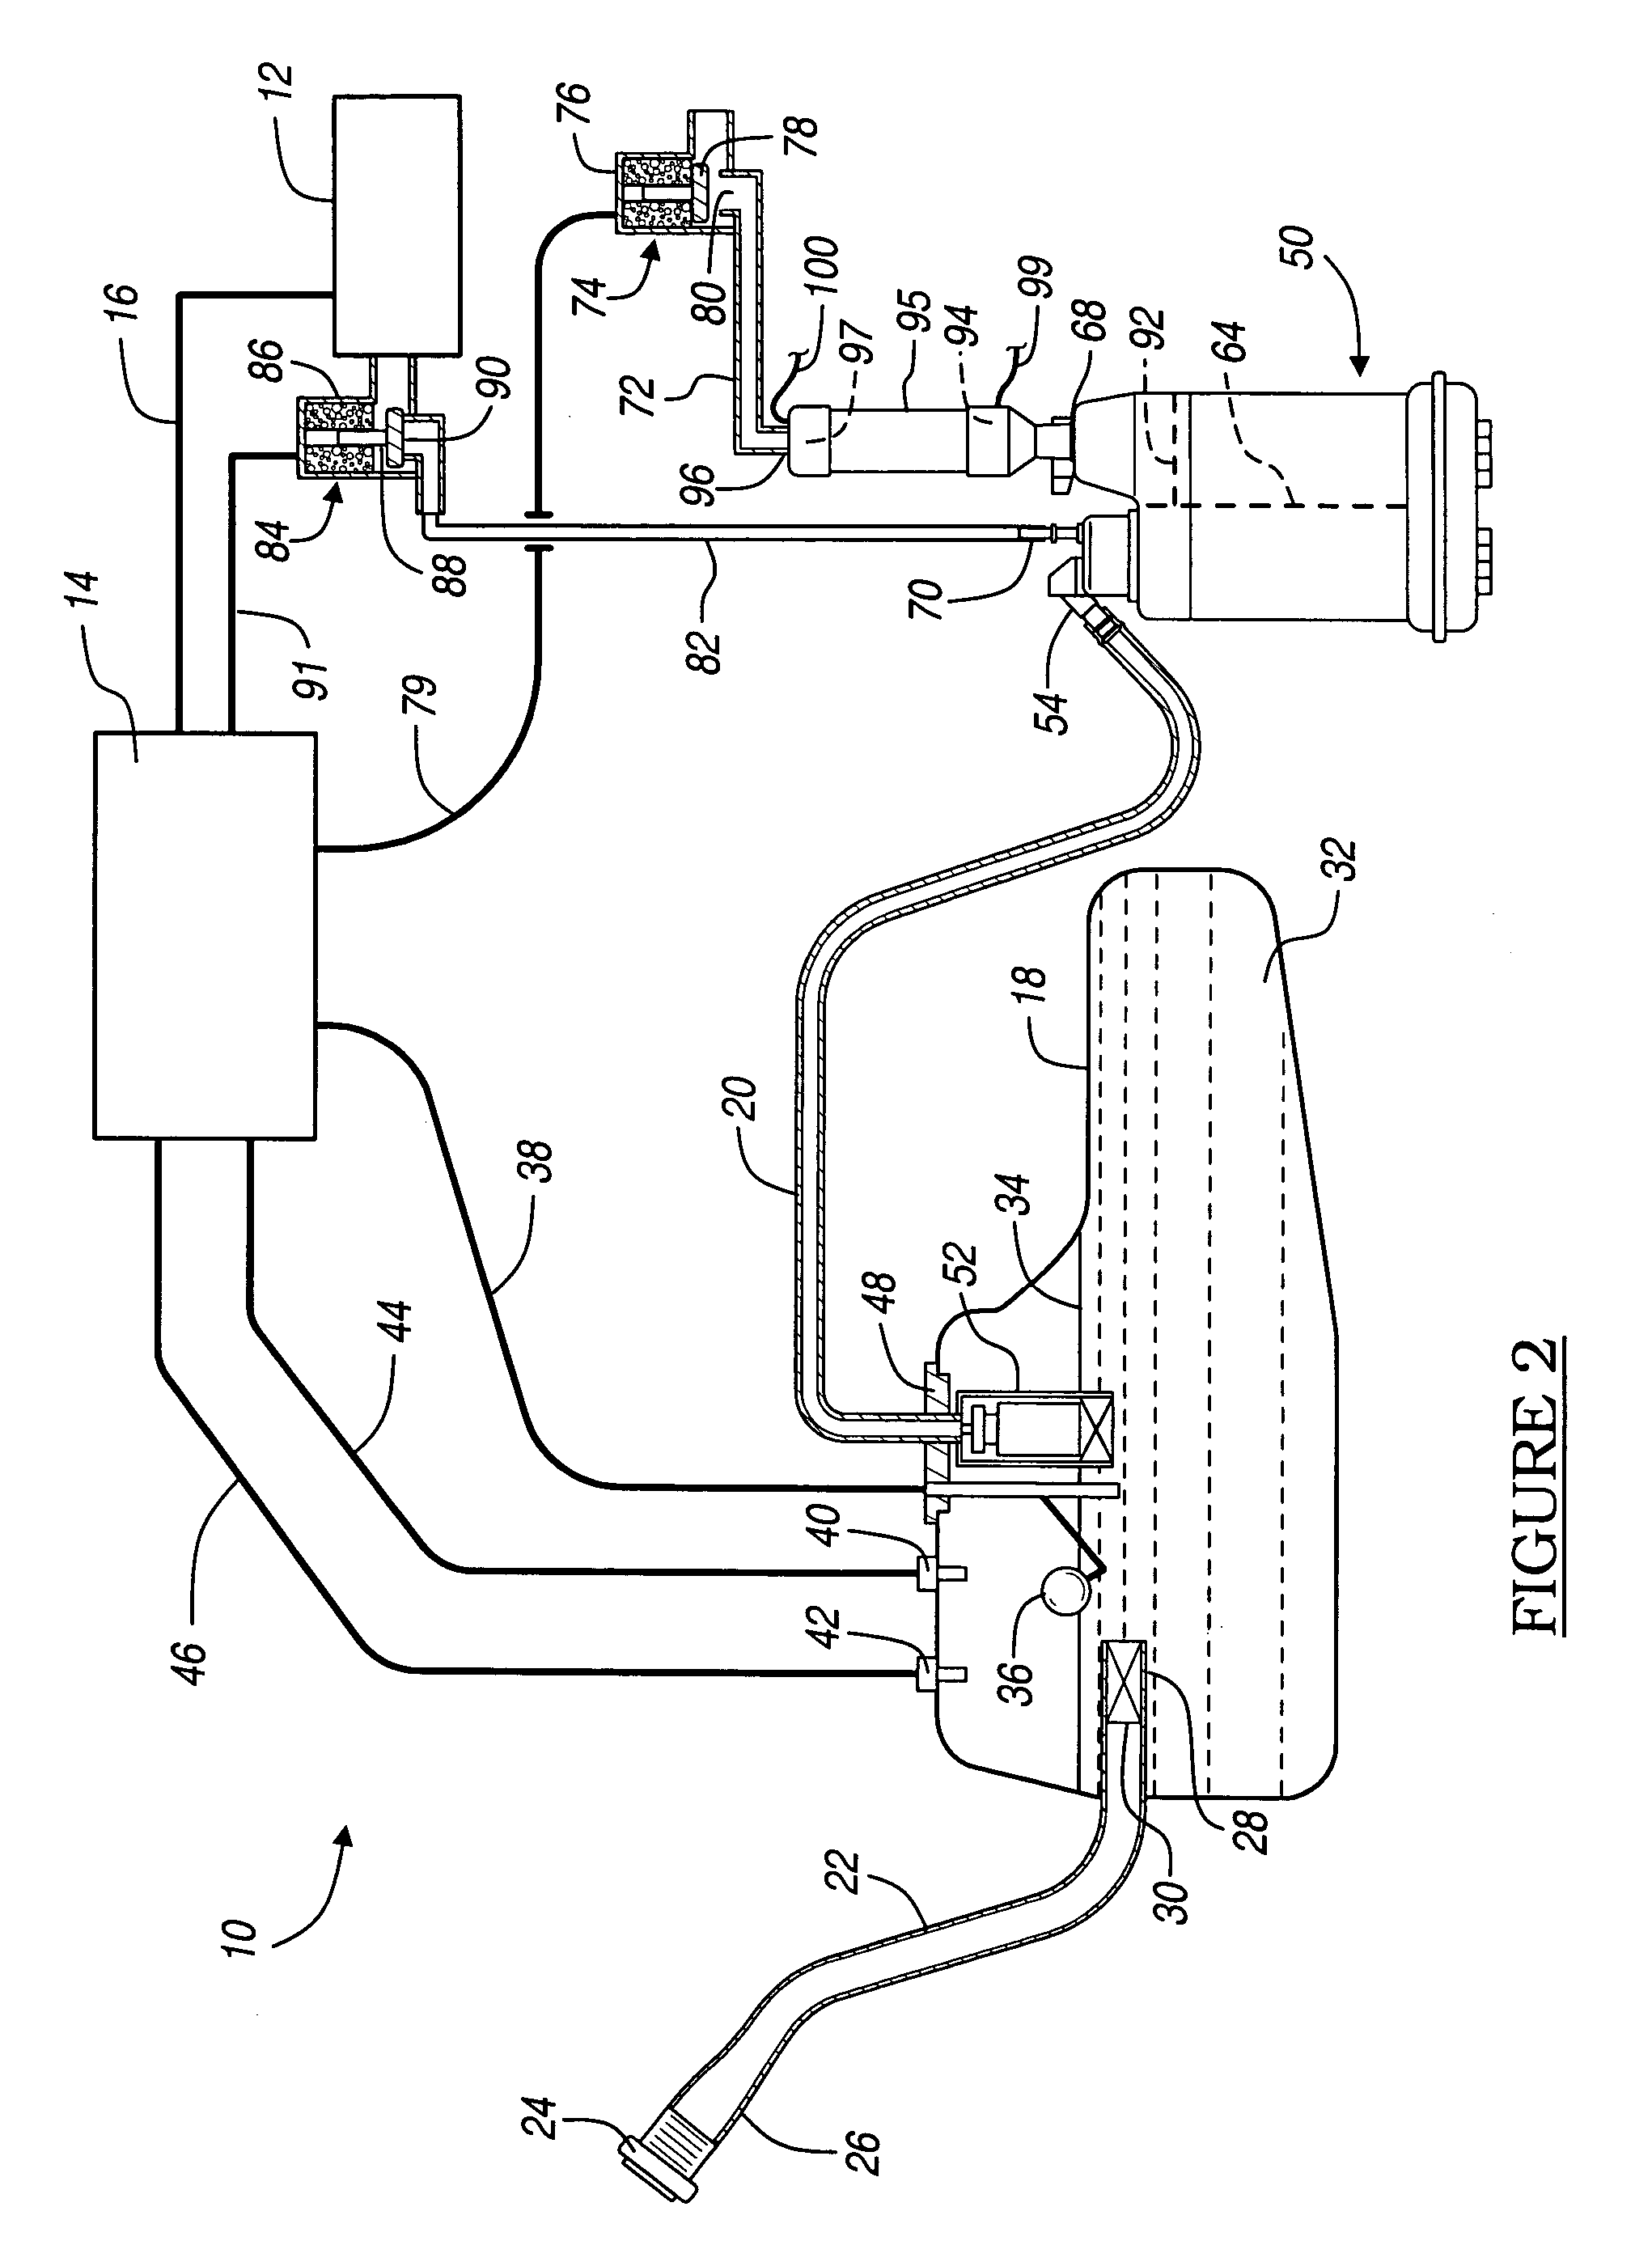 Method and system of evaporative emission control for hybrid vehicle using activated carbon fibers